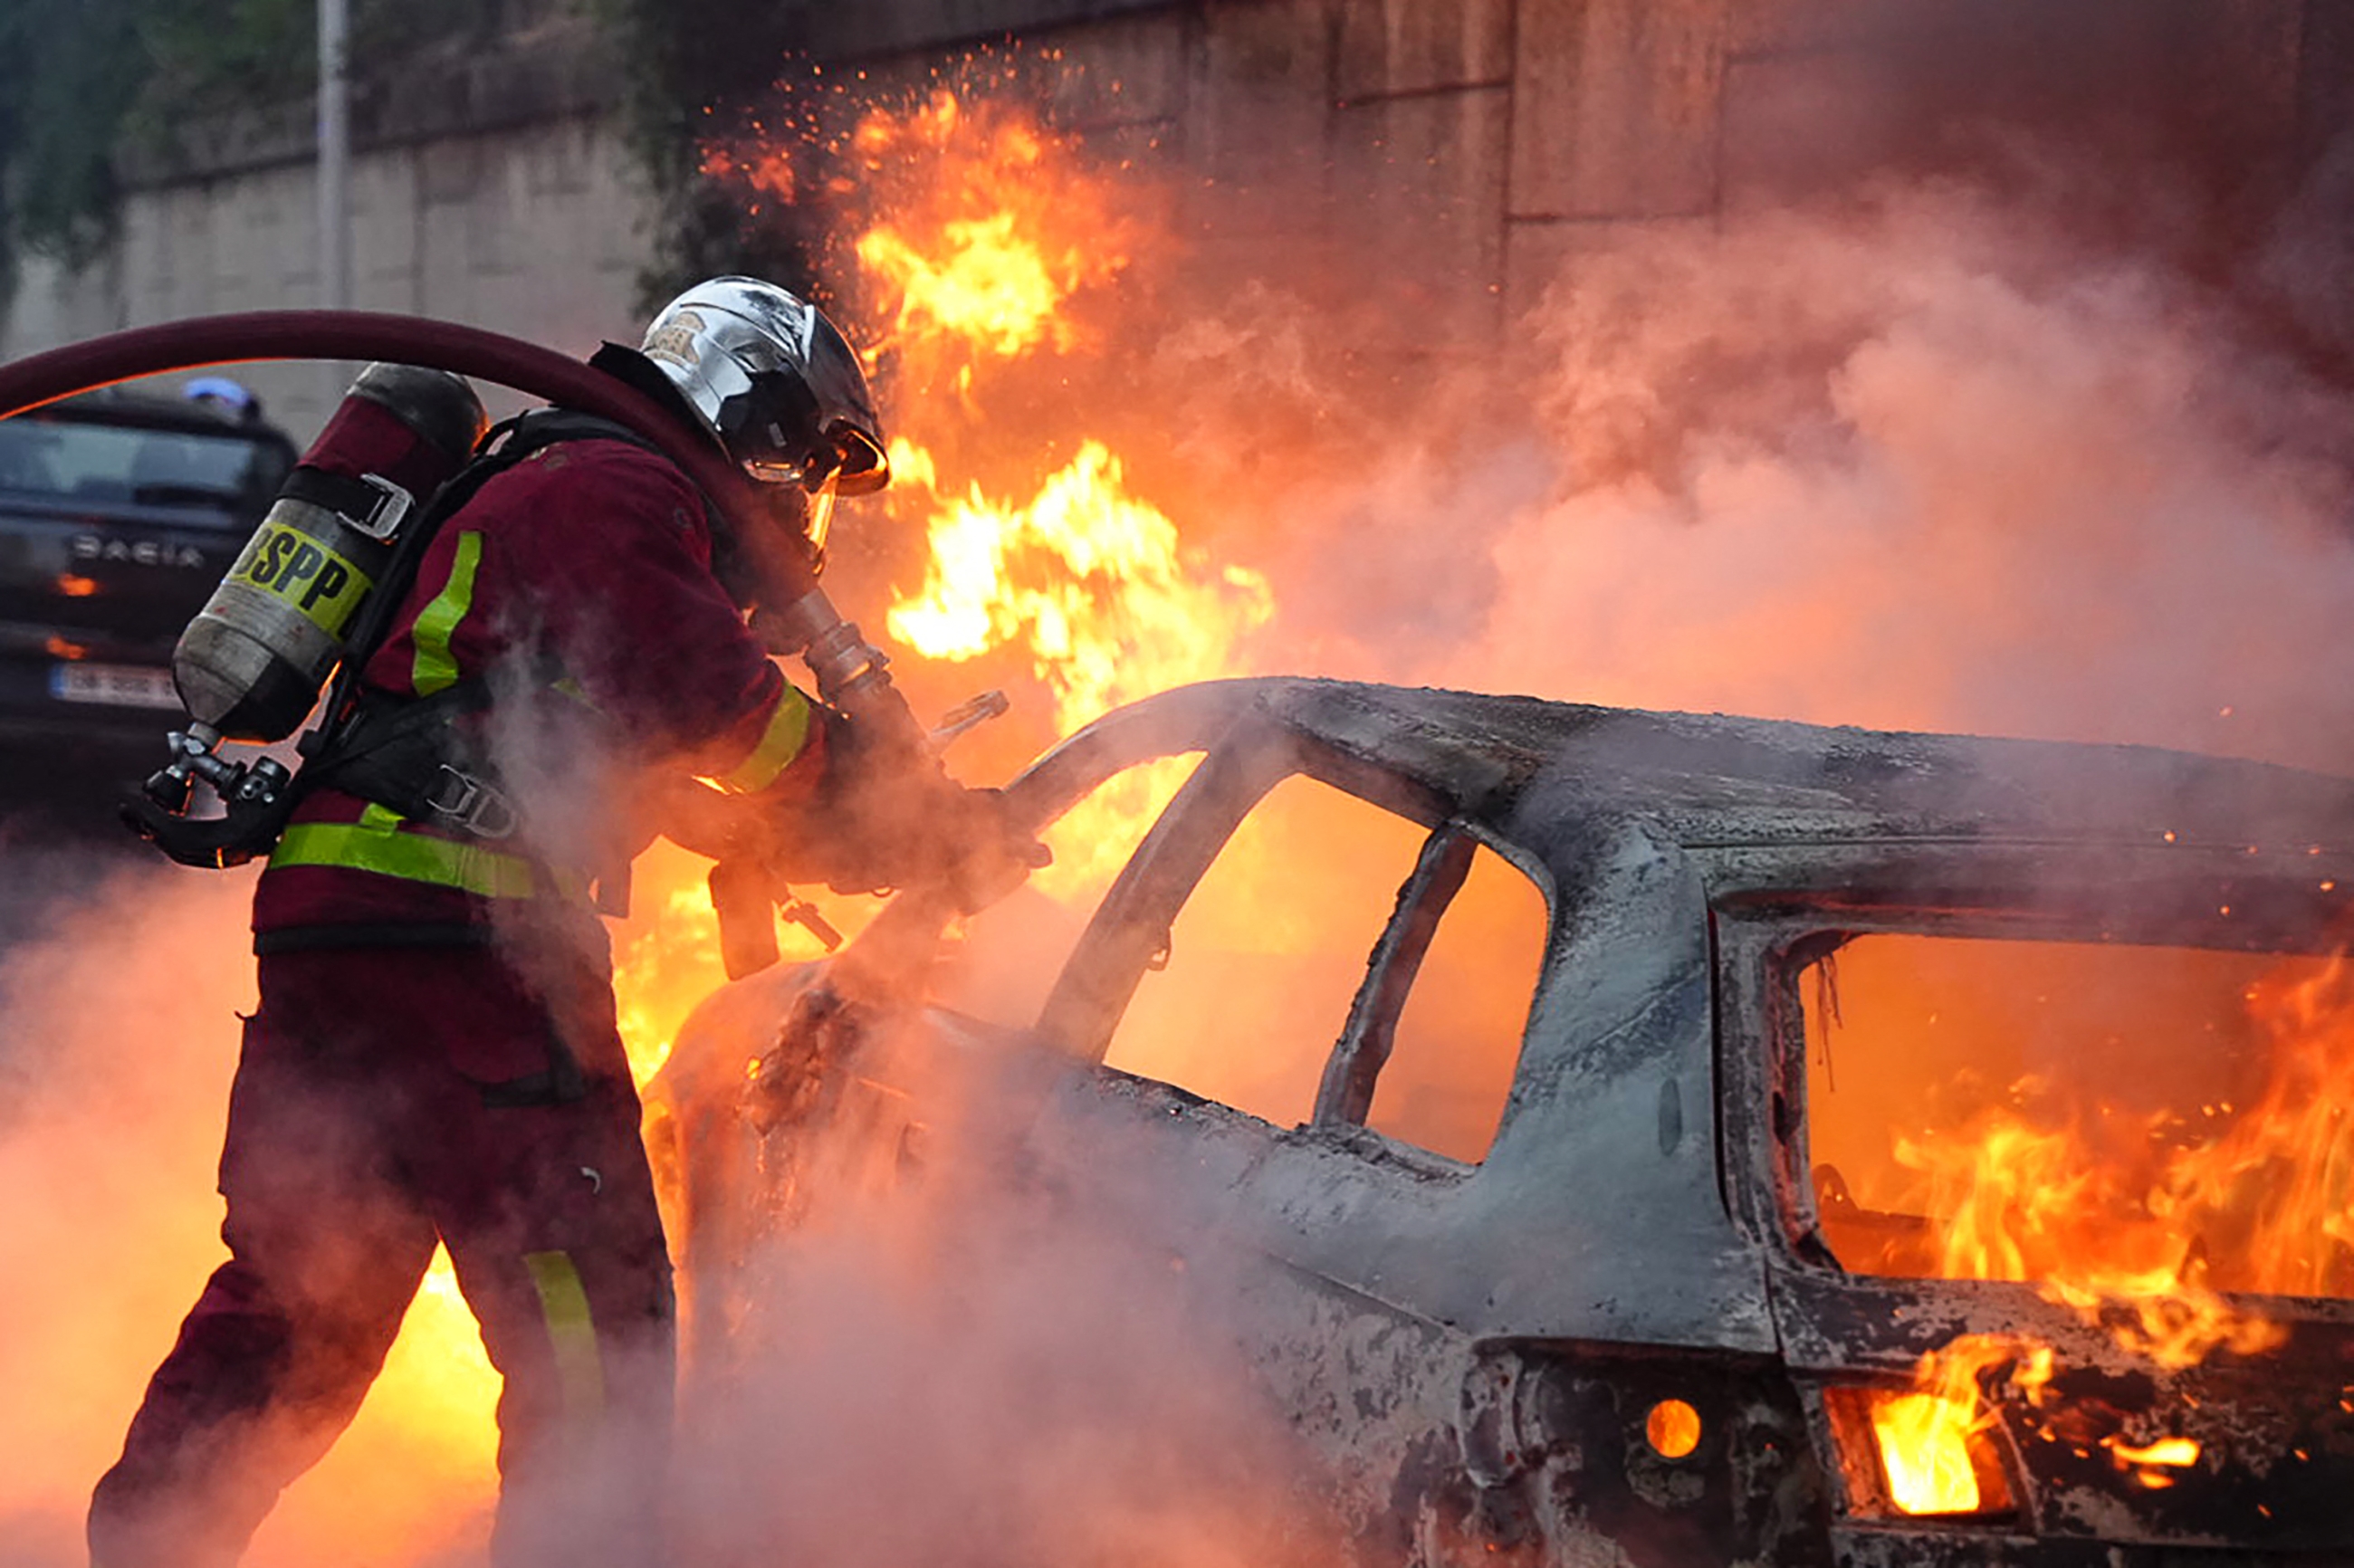 Firefighter extinguish a burning vehicle destroyed during protests in Nanterre, west of Paris, on 27 June (AFP)